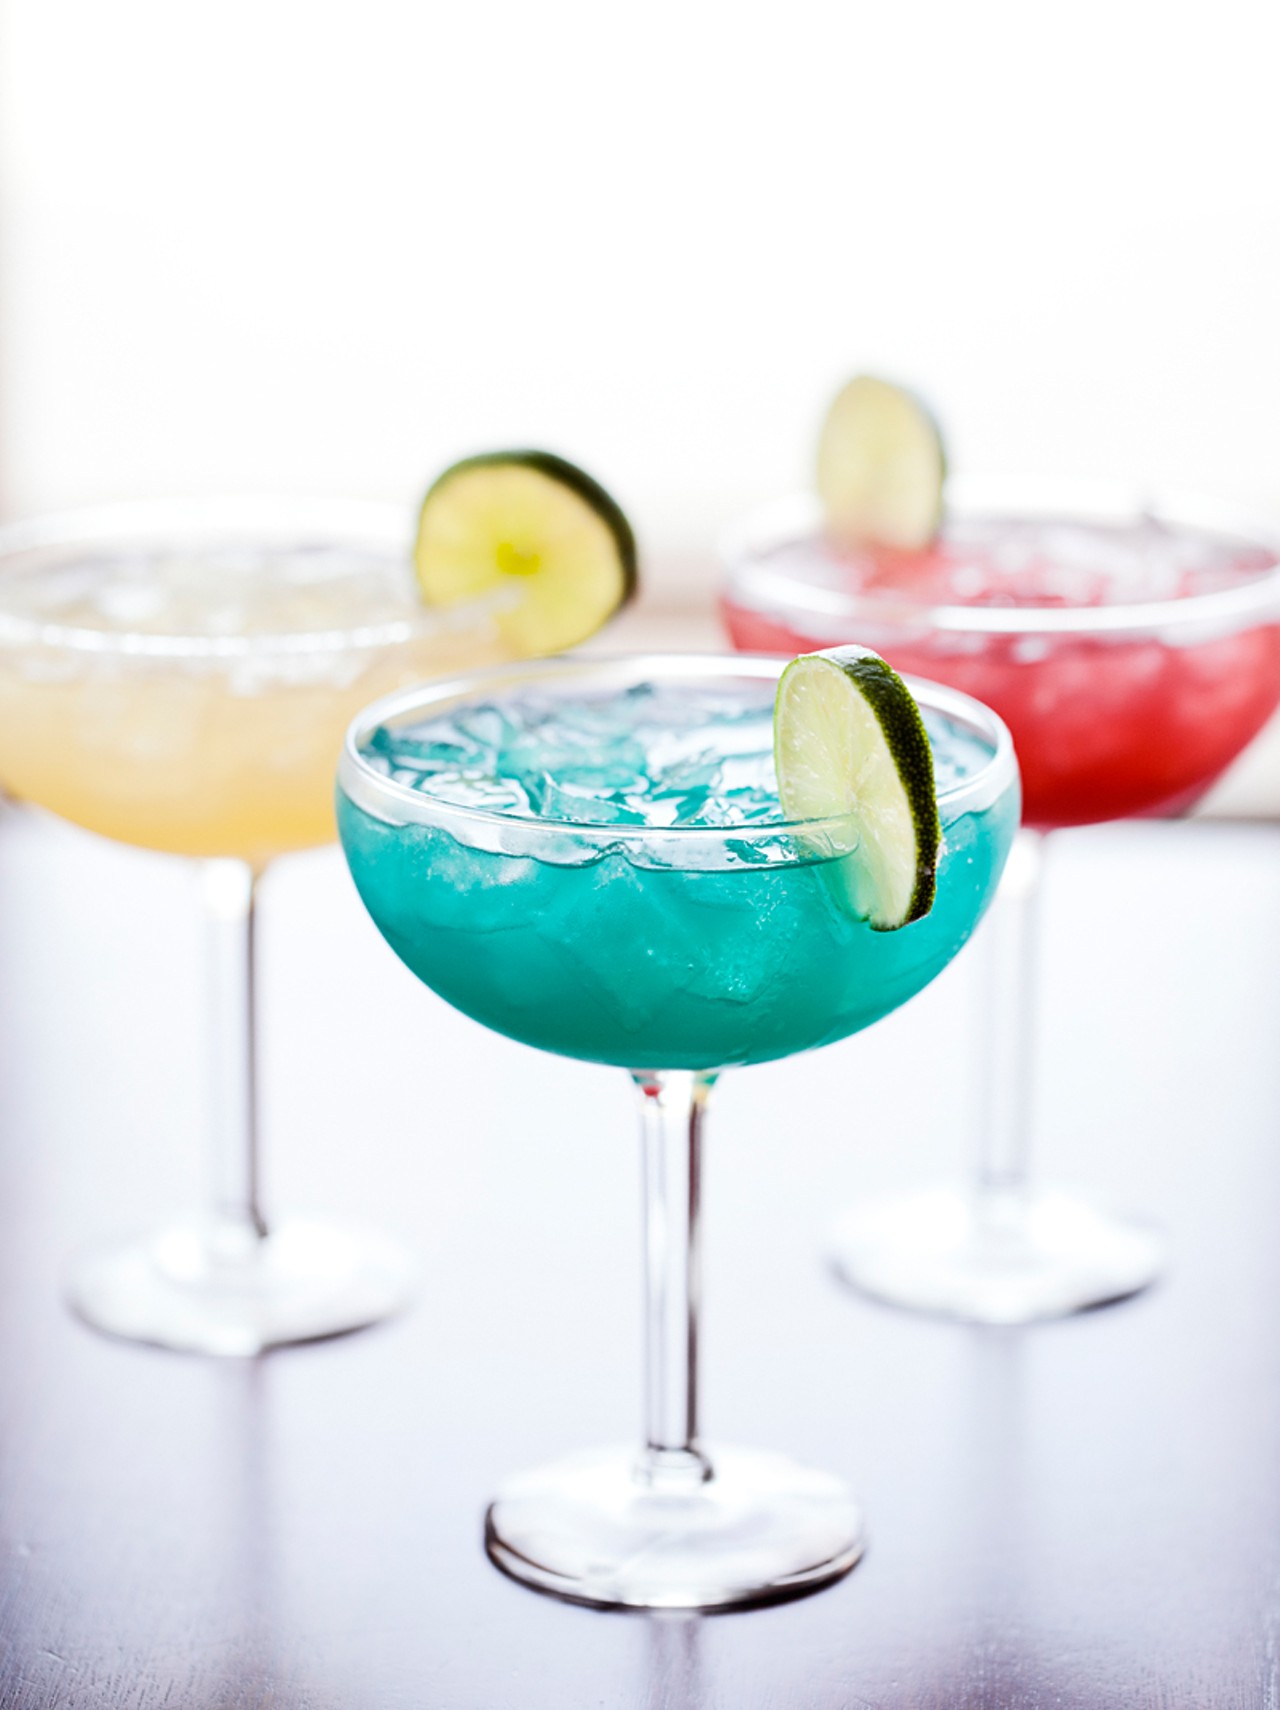 The "Blue," "Strawberry" and "Skinny" margs.